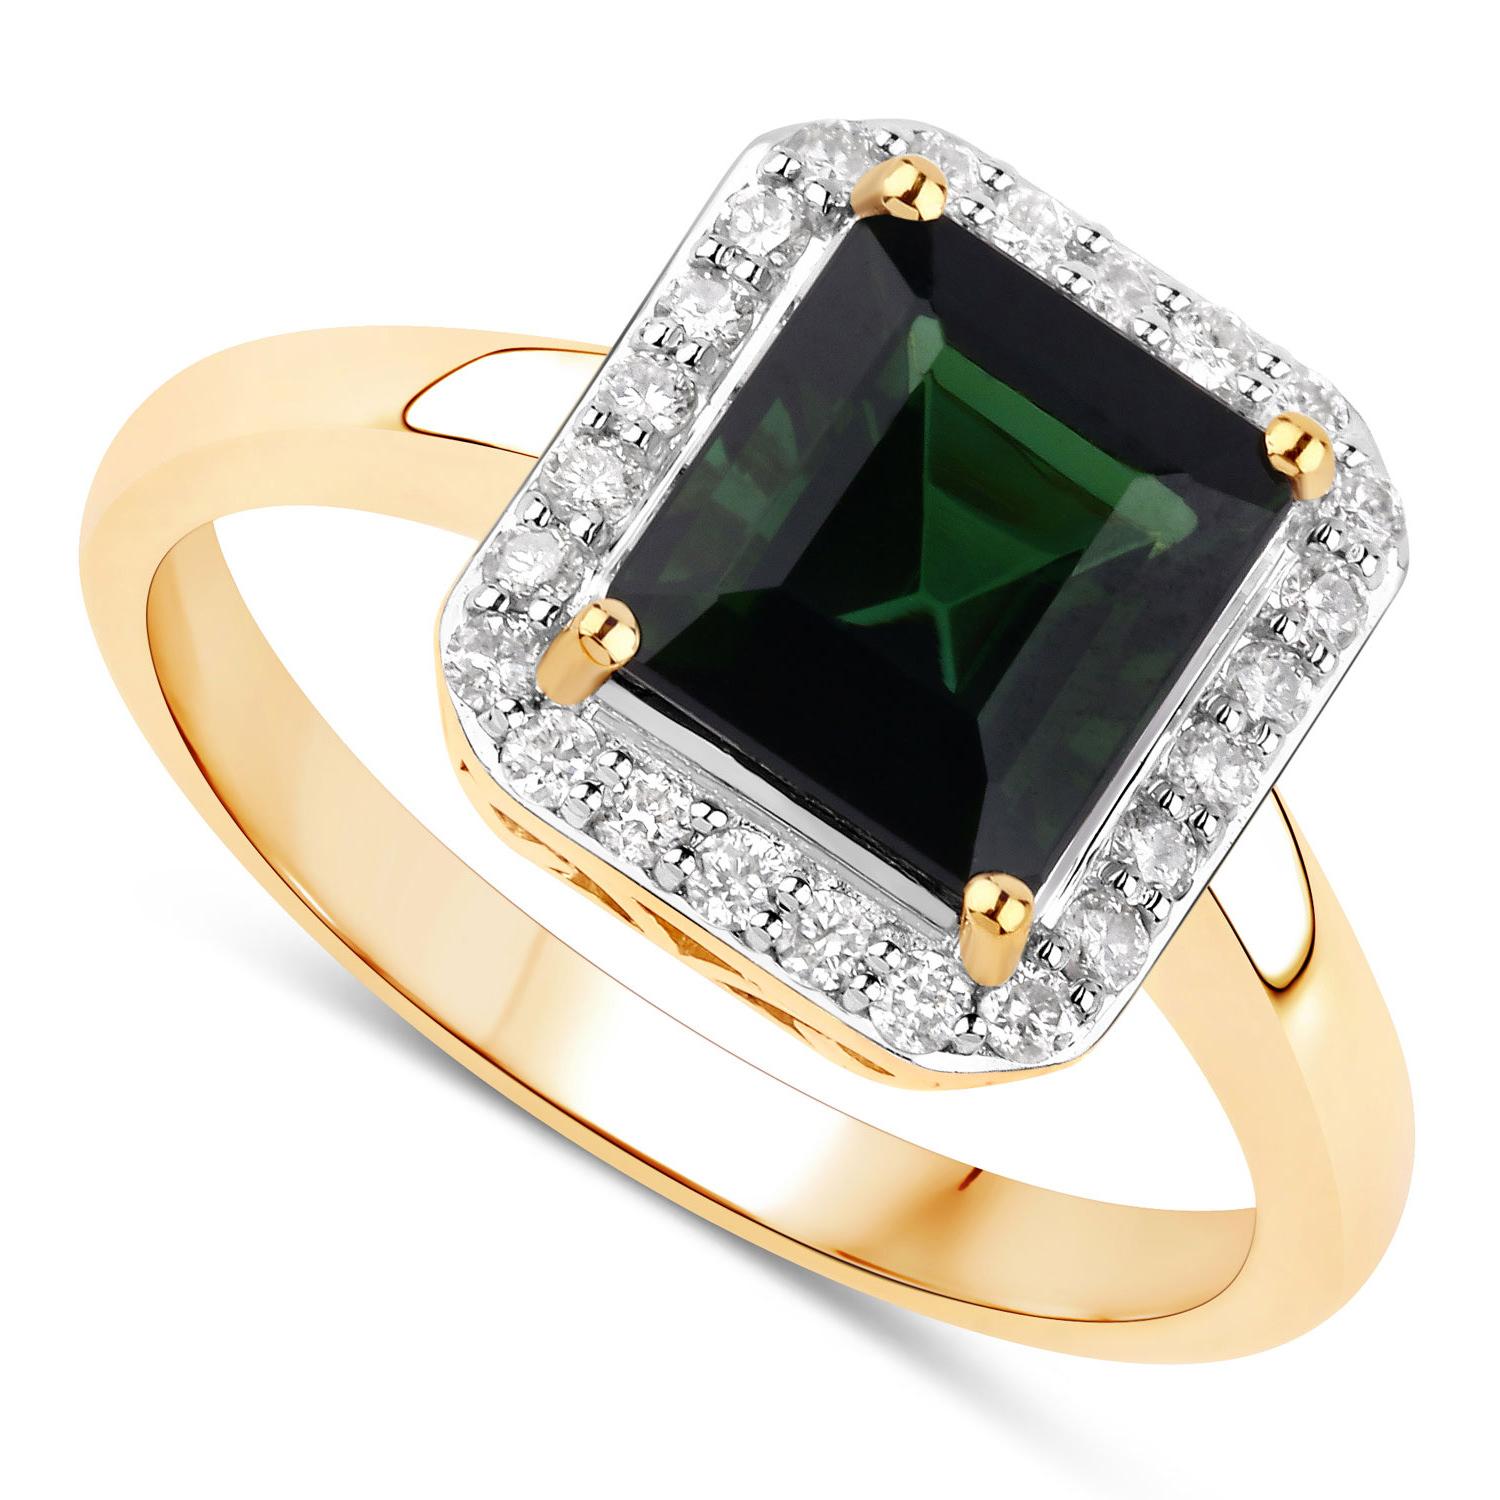 It comes with the appraisal by GIA GG/AJP
Green Tourmaline = 2.80 Carat ( 8 x 7 mm )
Cut: Emerald
Diamonds = 0.20 Carats
Diamonds Quantity: 24
Metal: 14K Yellow Gold
Ring Size: 7* US
*It can be resized complimentary